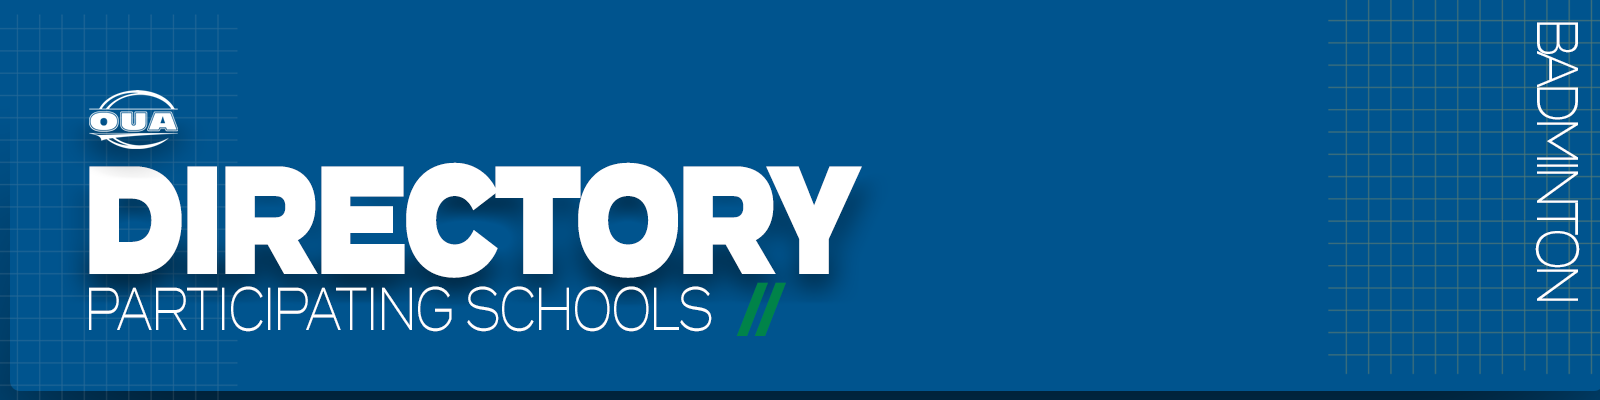 Predominantly blue graphic with large white text on the left side that reads 'Directory, Participating Schools' and small white vertical text on the right side that reads 'Badminton'